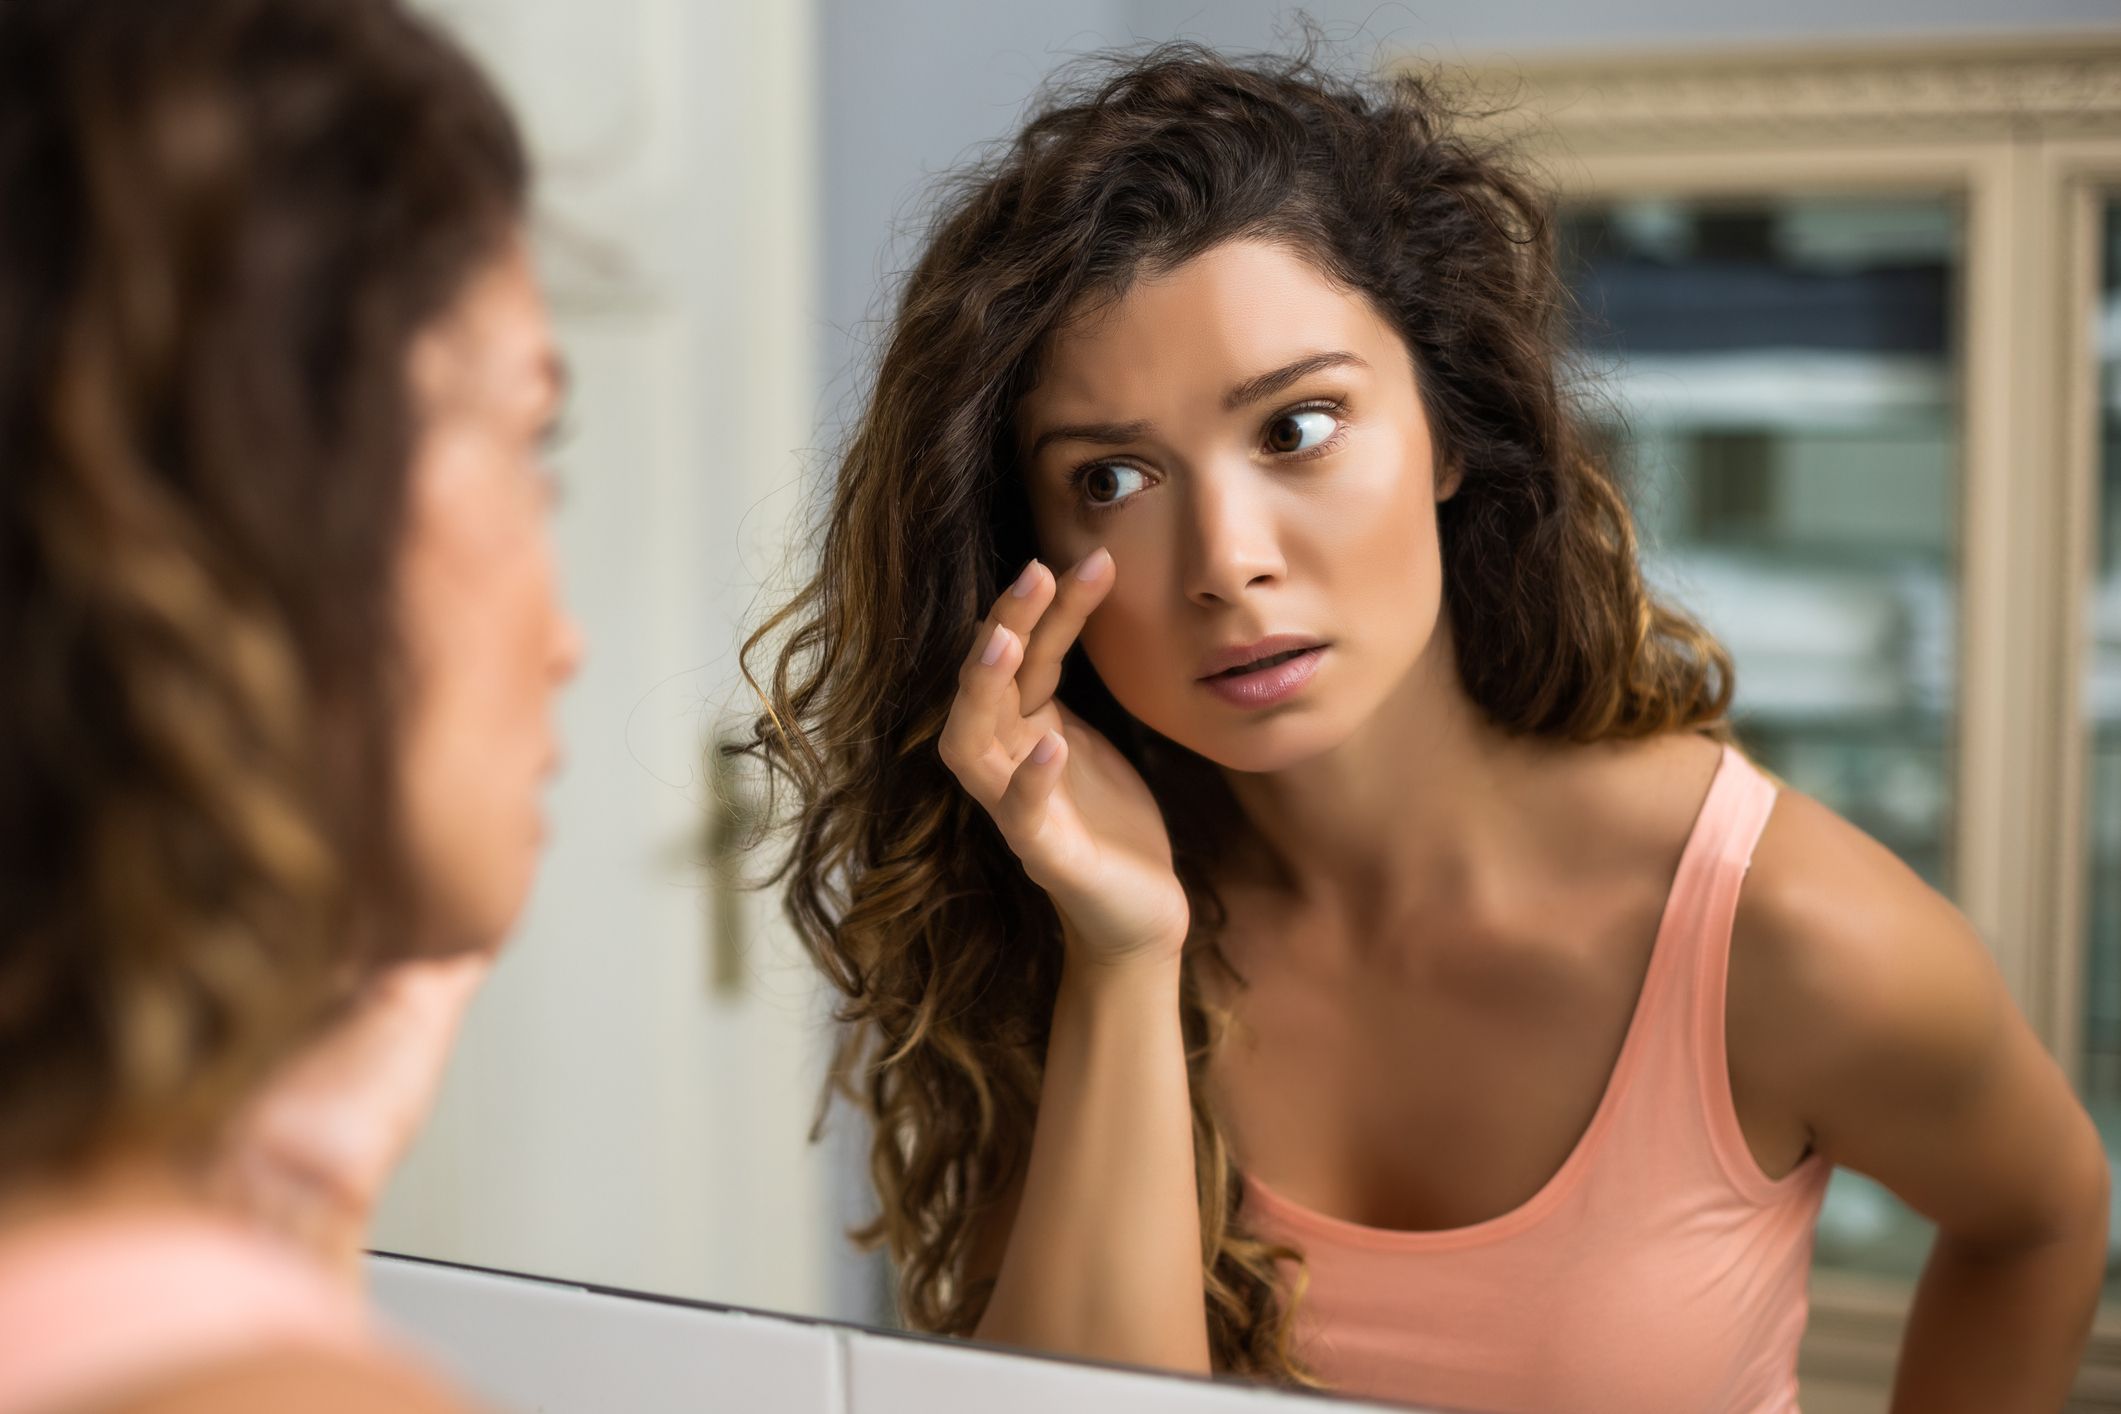 Facial Swelling: 12 Causes and Treatments for a Puffy Face